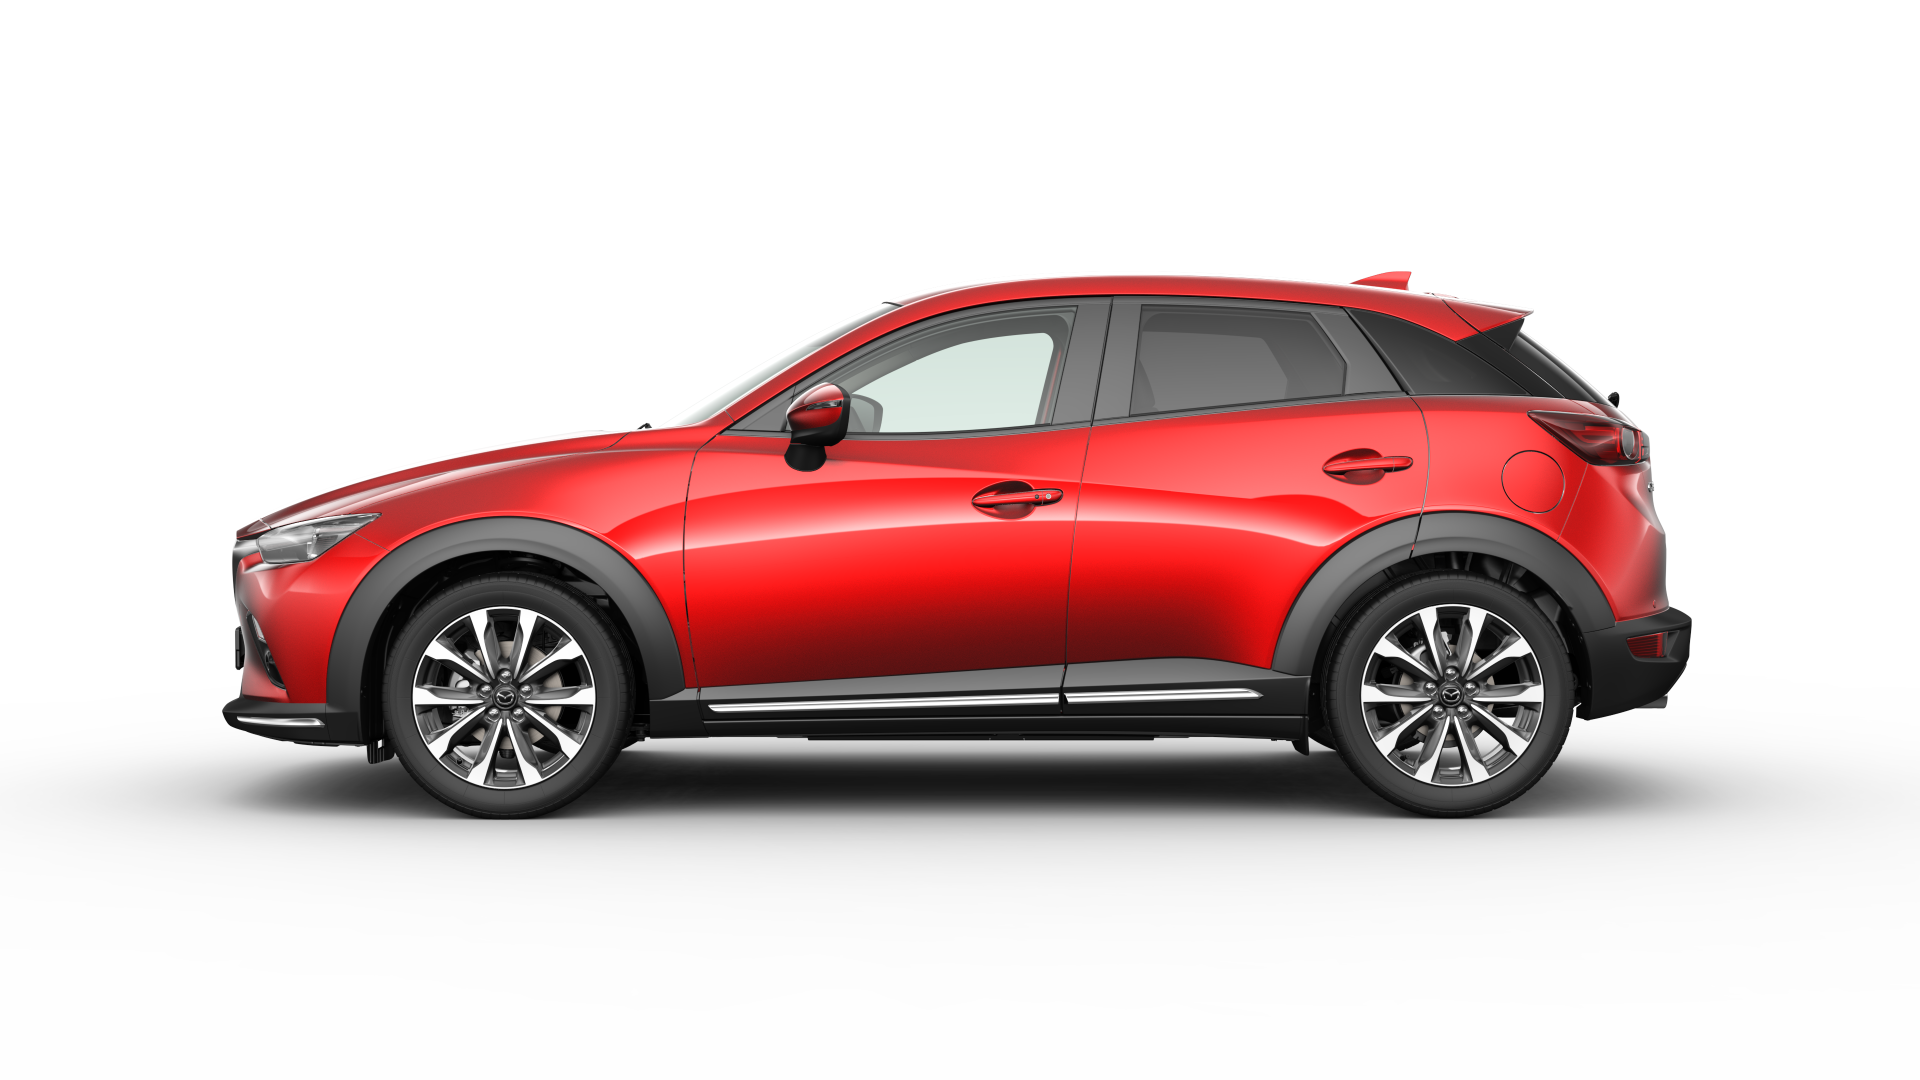 Sportier Mazda CX-3 Soon to Be Available in SA Market